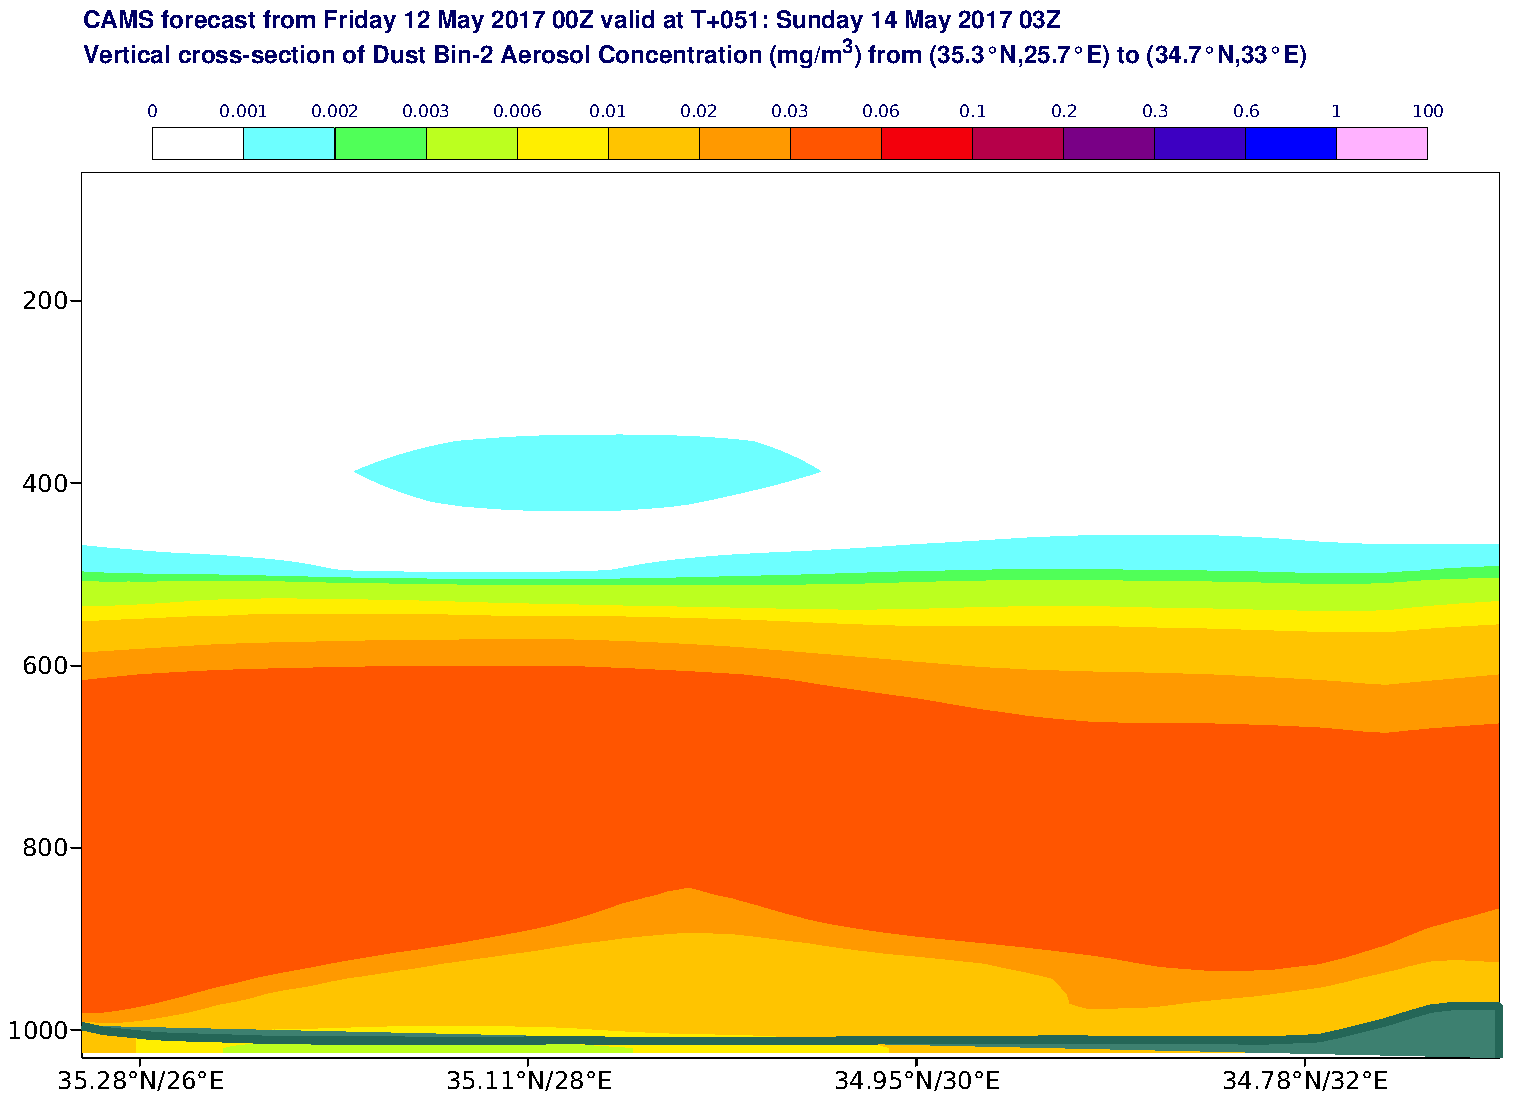 Vertical cross-section of Dust Bin-2 Aerosol Concentration (mg/m3) valid at T51 - 2017-05-14 03:00